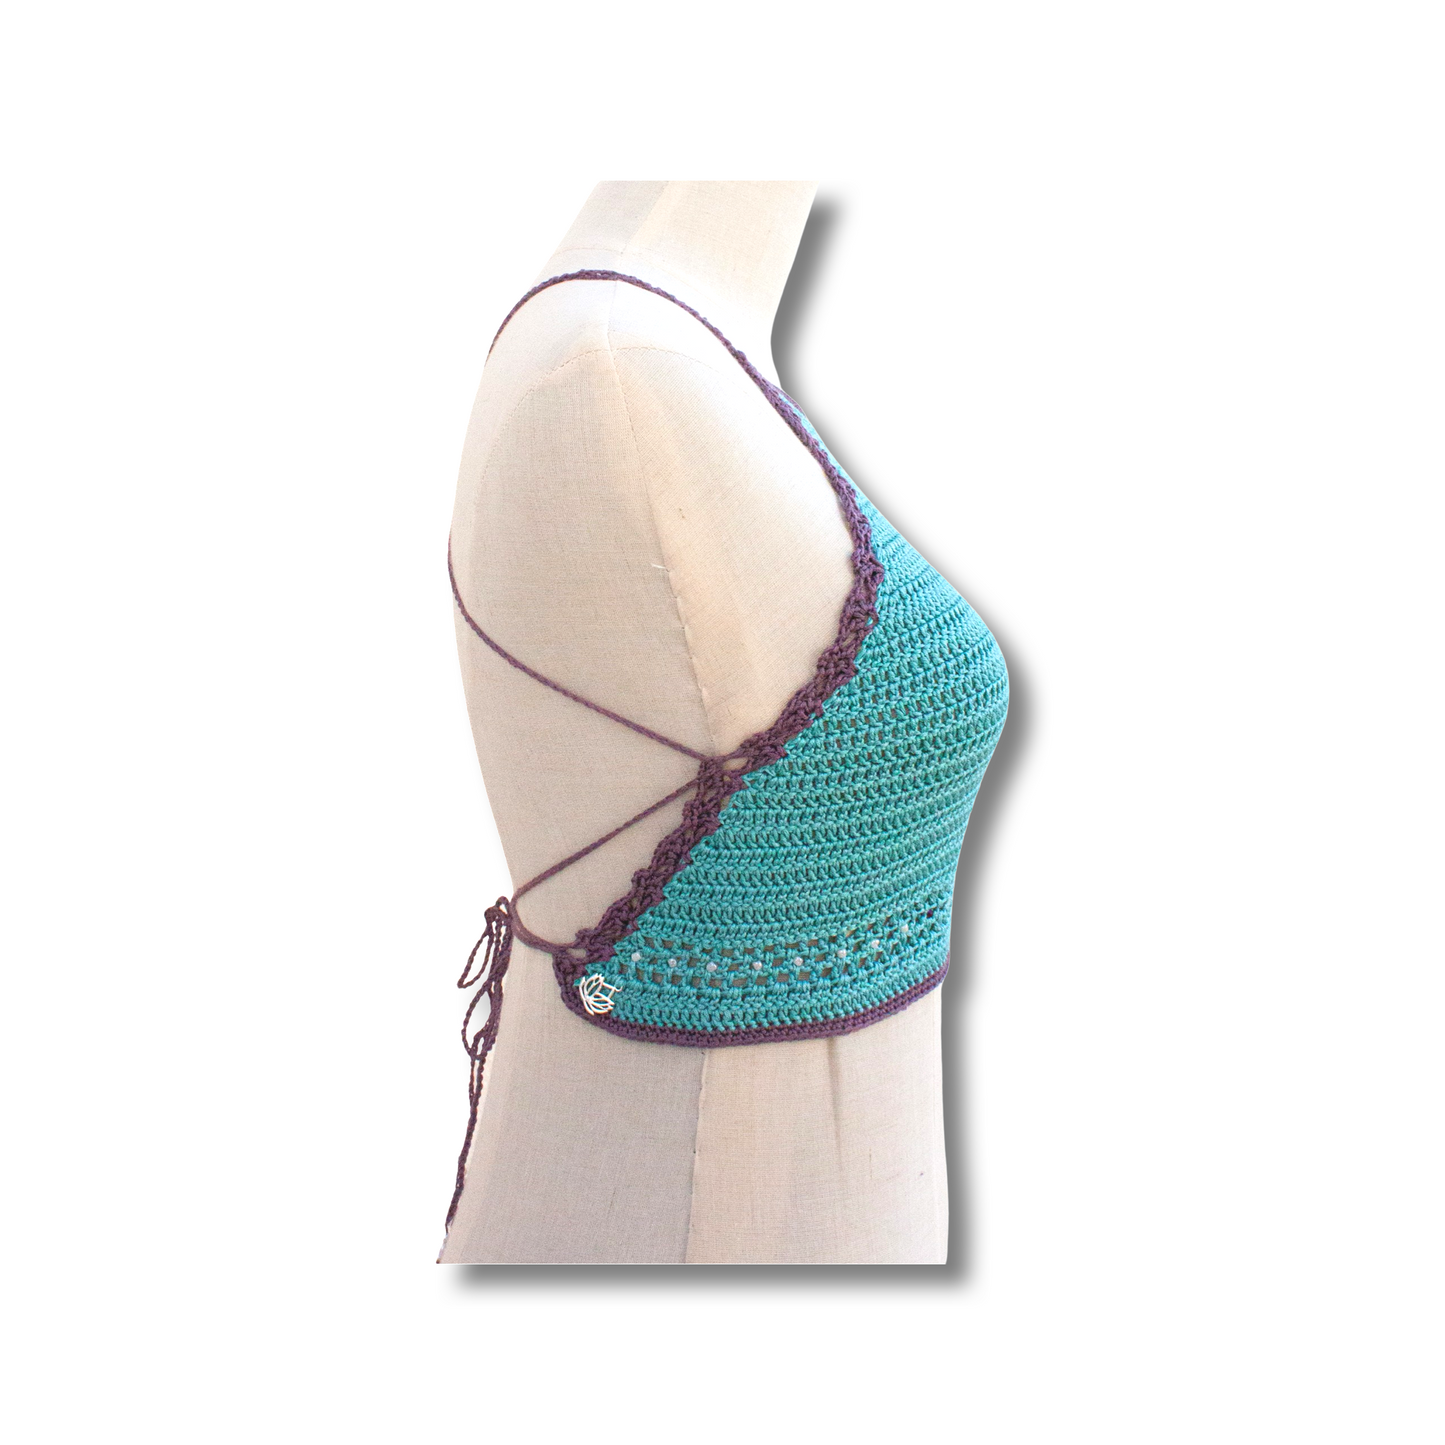 Crochet Crop Top (Turquoise and Purple)